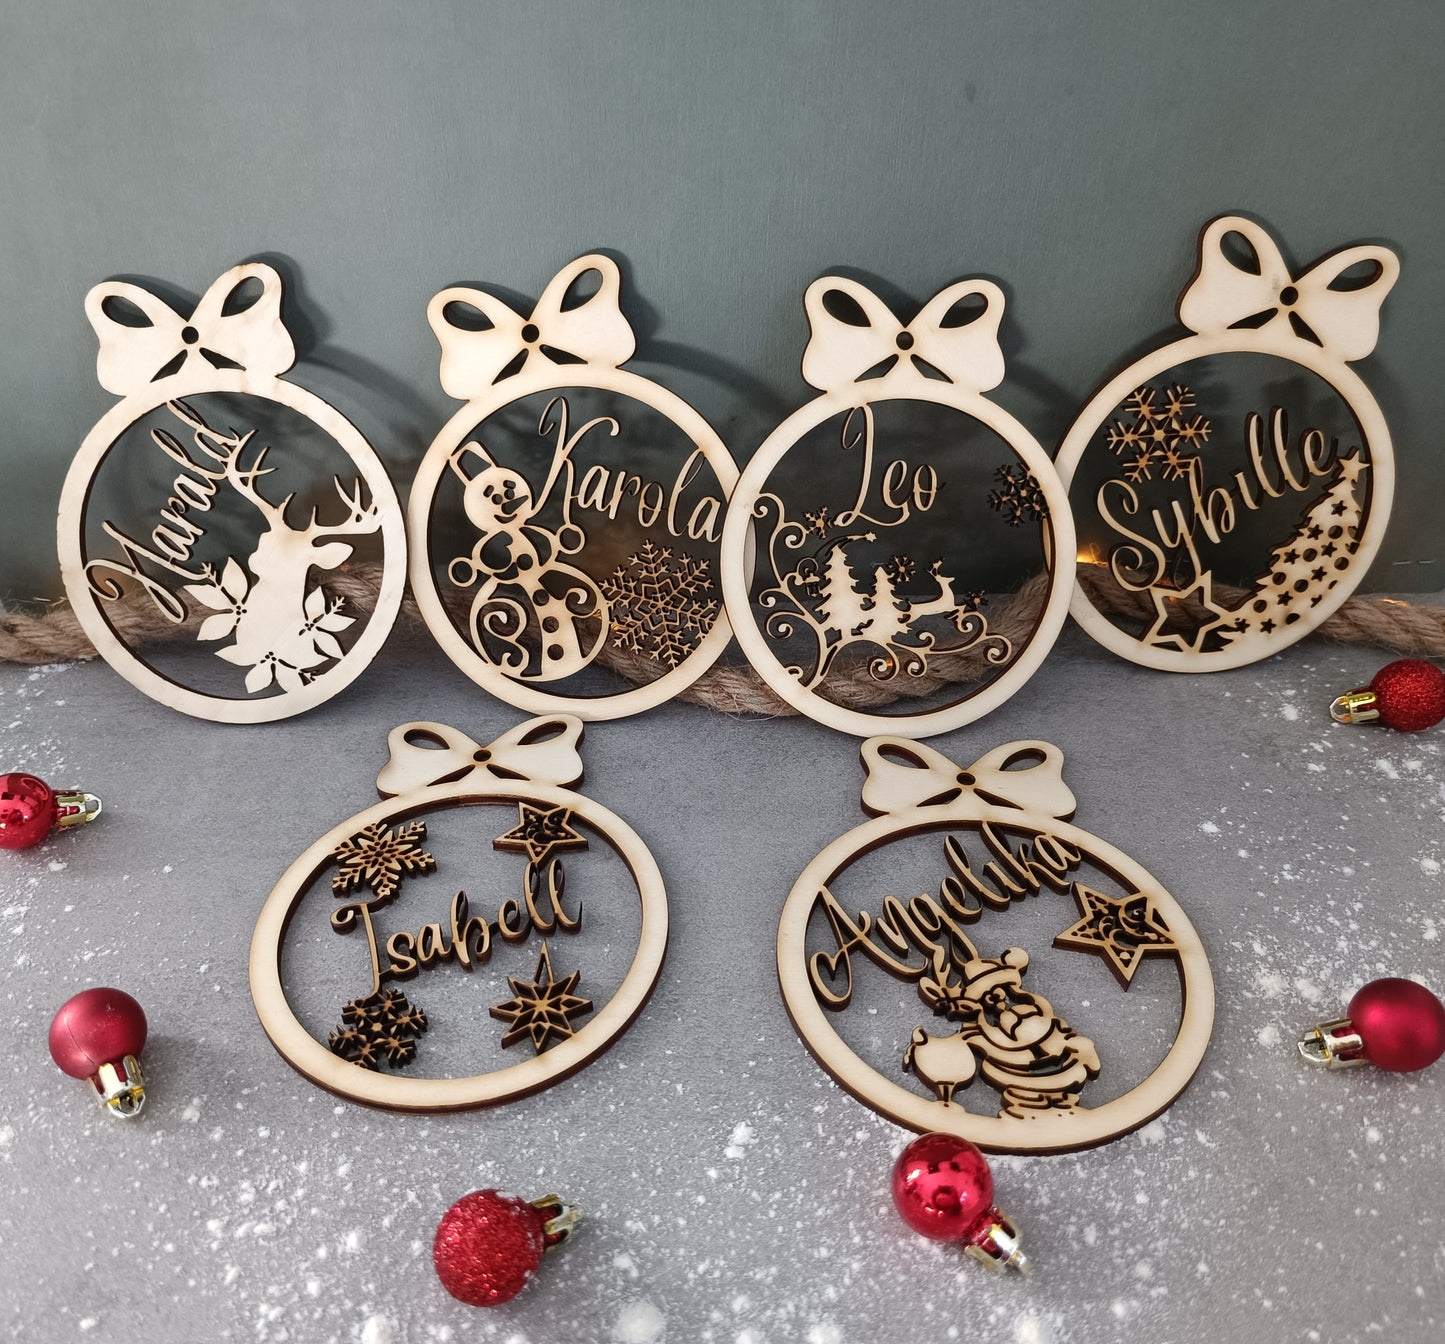 Wooden Christmas tree baubles/personalized/Christmas tree baubles/Christmas baubles personalized